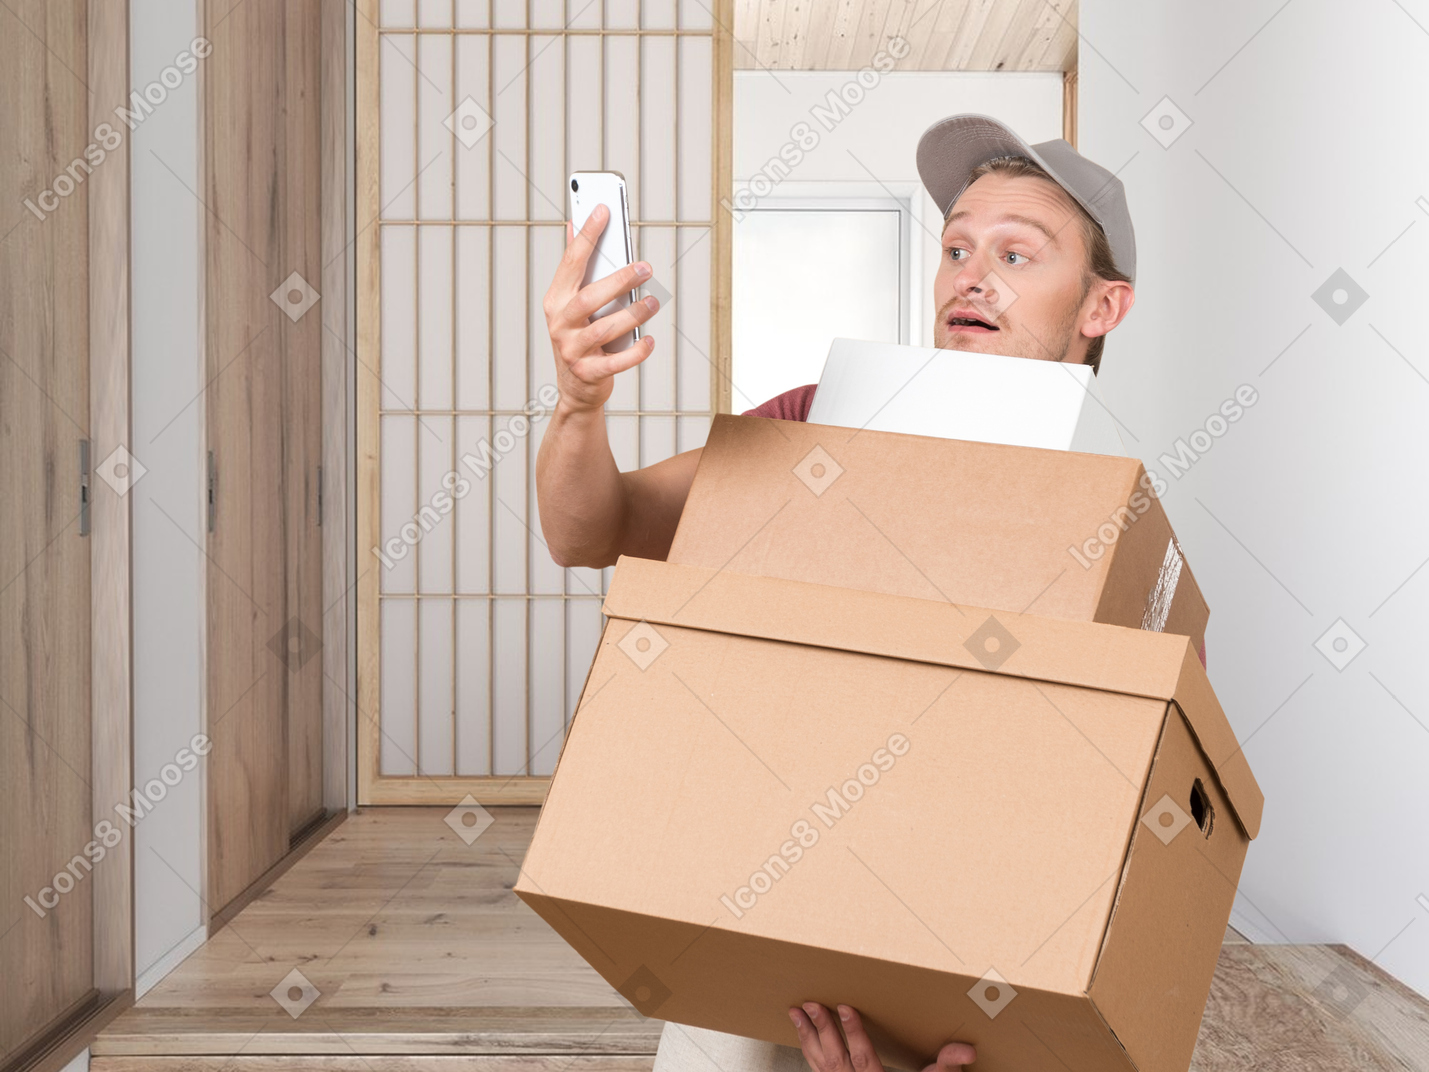 Man moving boxes in a new house